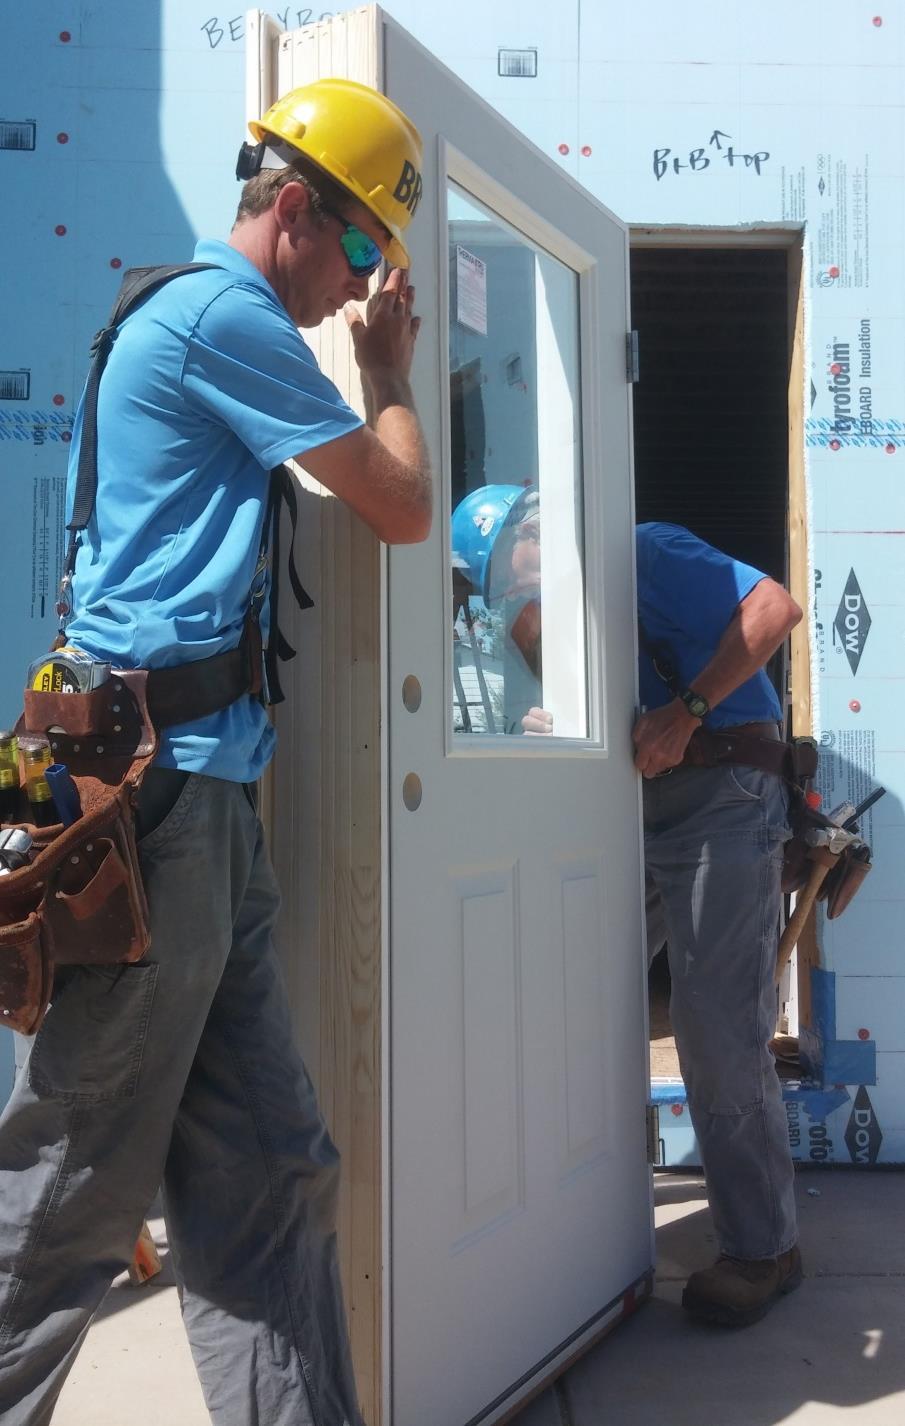 Common Safety Concerns Safe Lifting / Carrying Always team up to carry doors. Teach workers to lift with their knees, not their back, and to not twist while lifting/carrying.